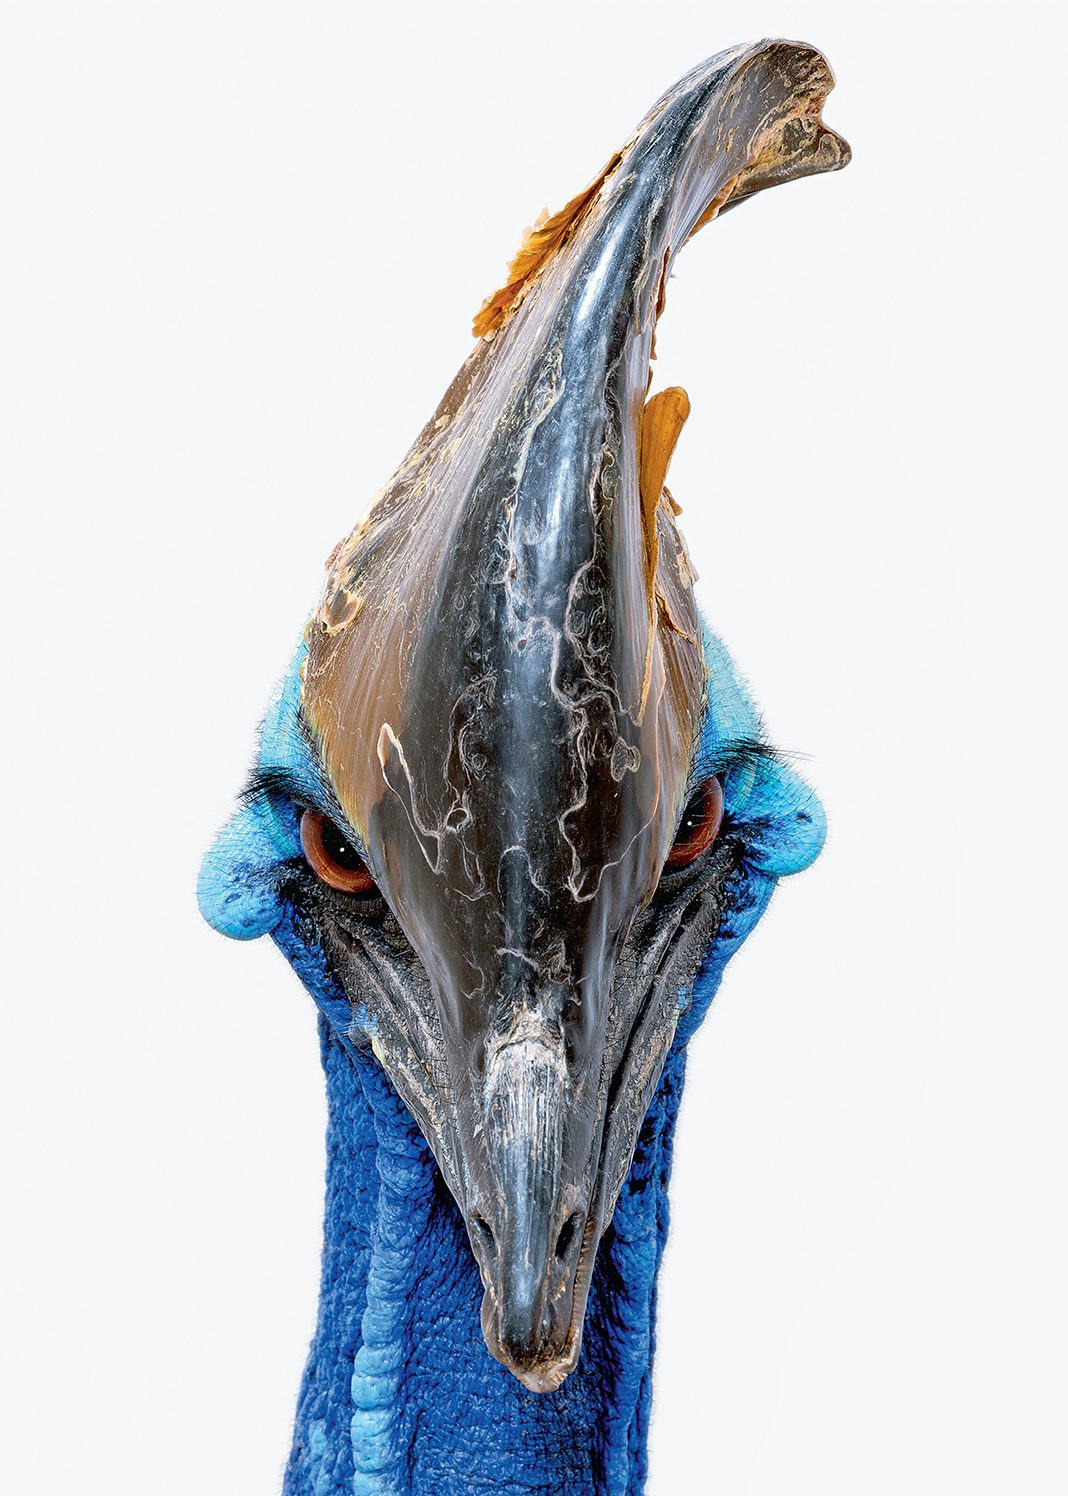 Southern cassowary (Robert Clark/Published by Phaidon)